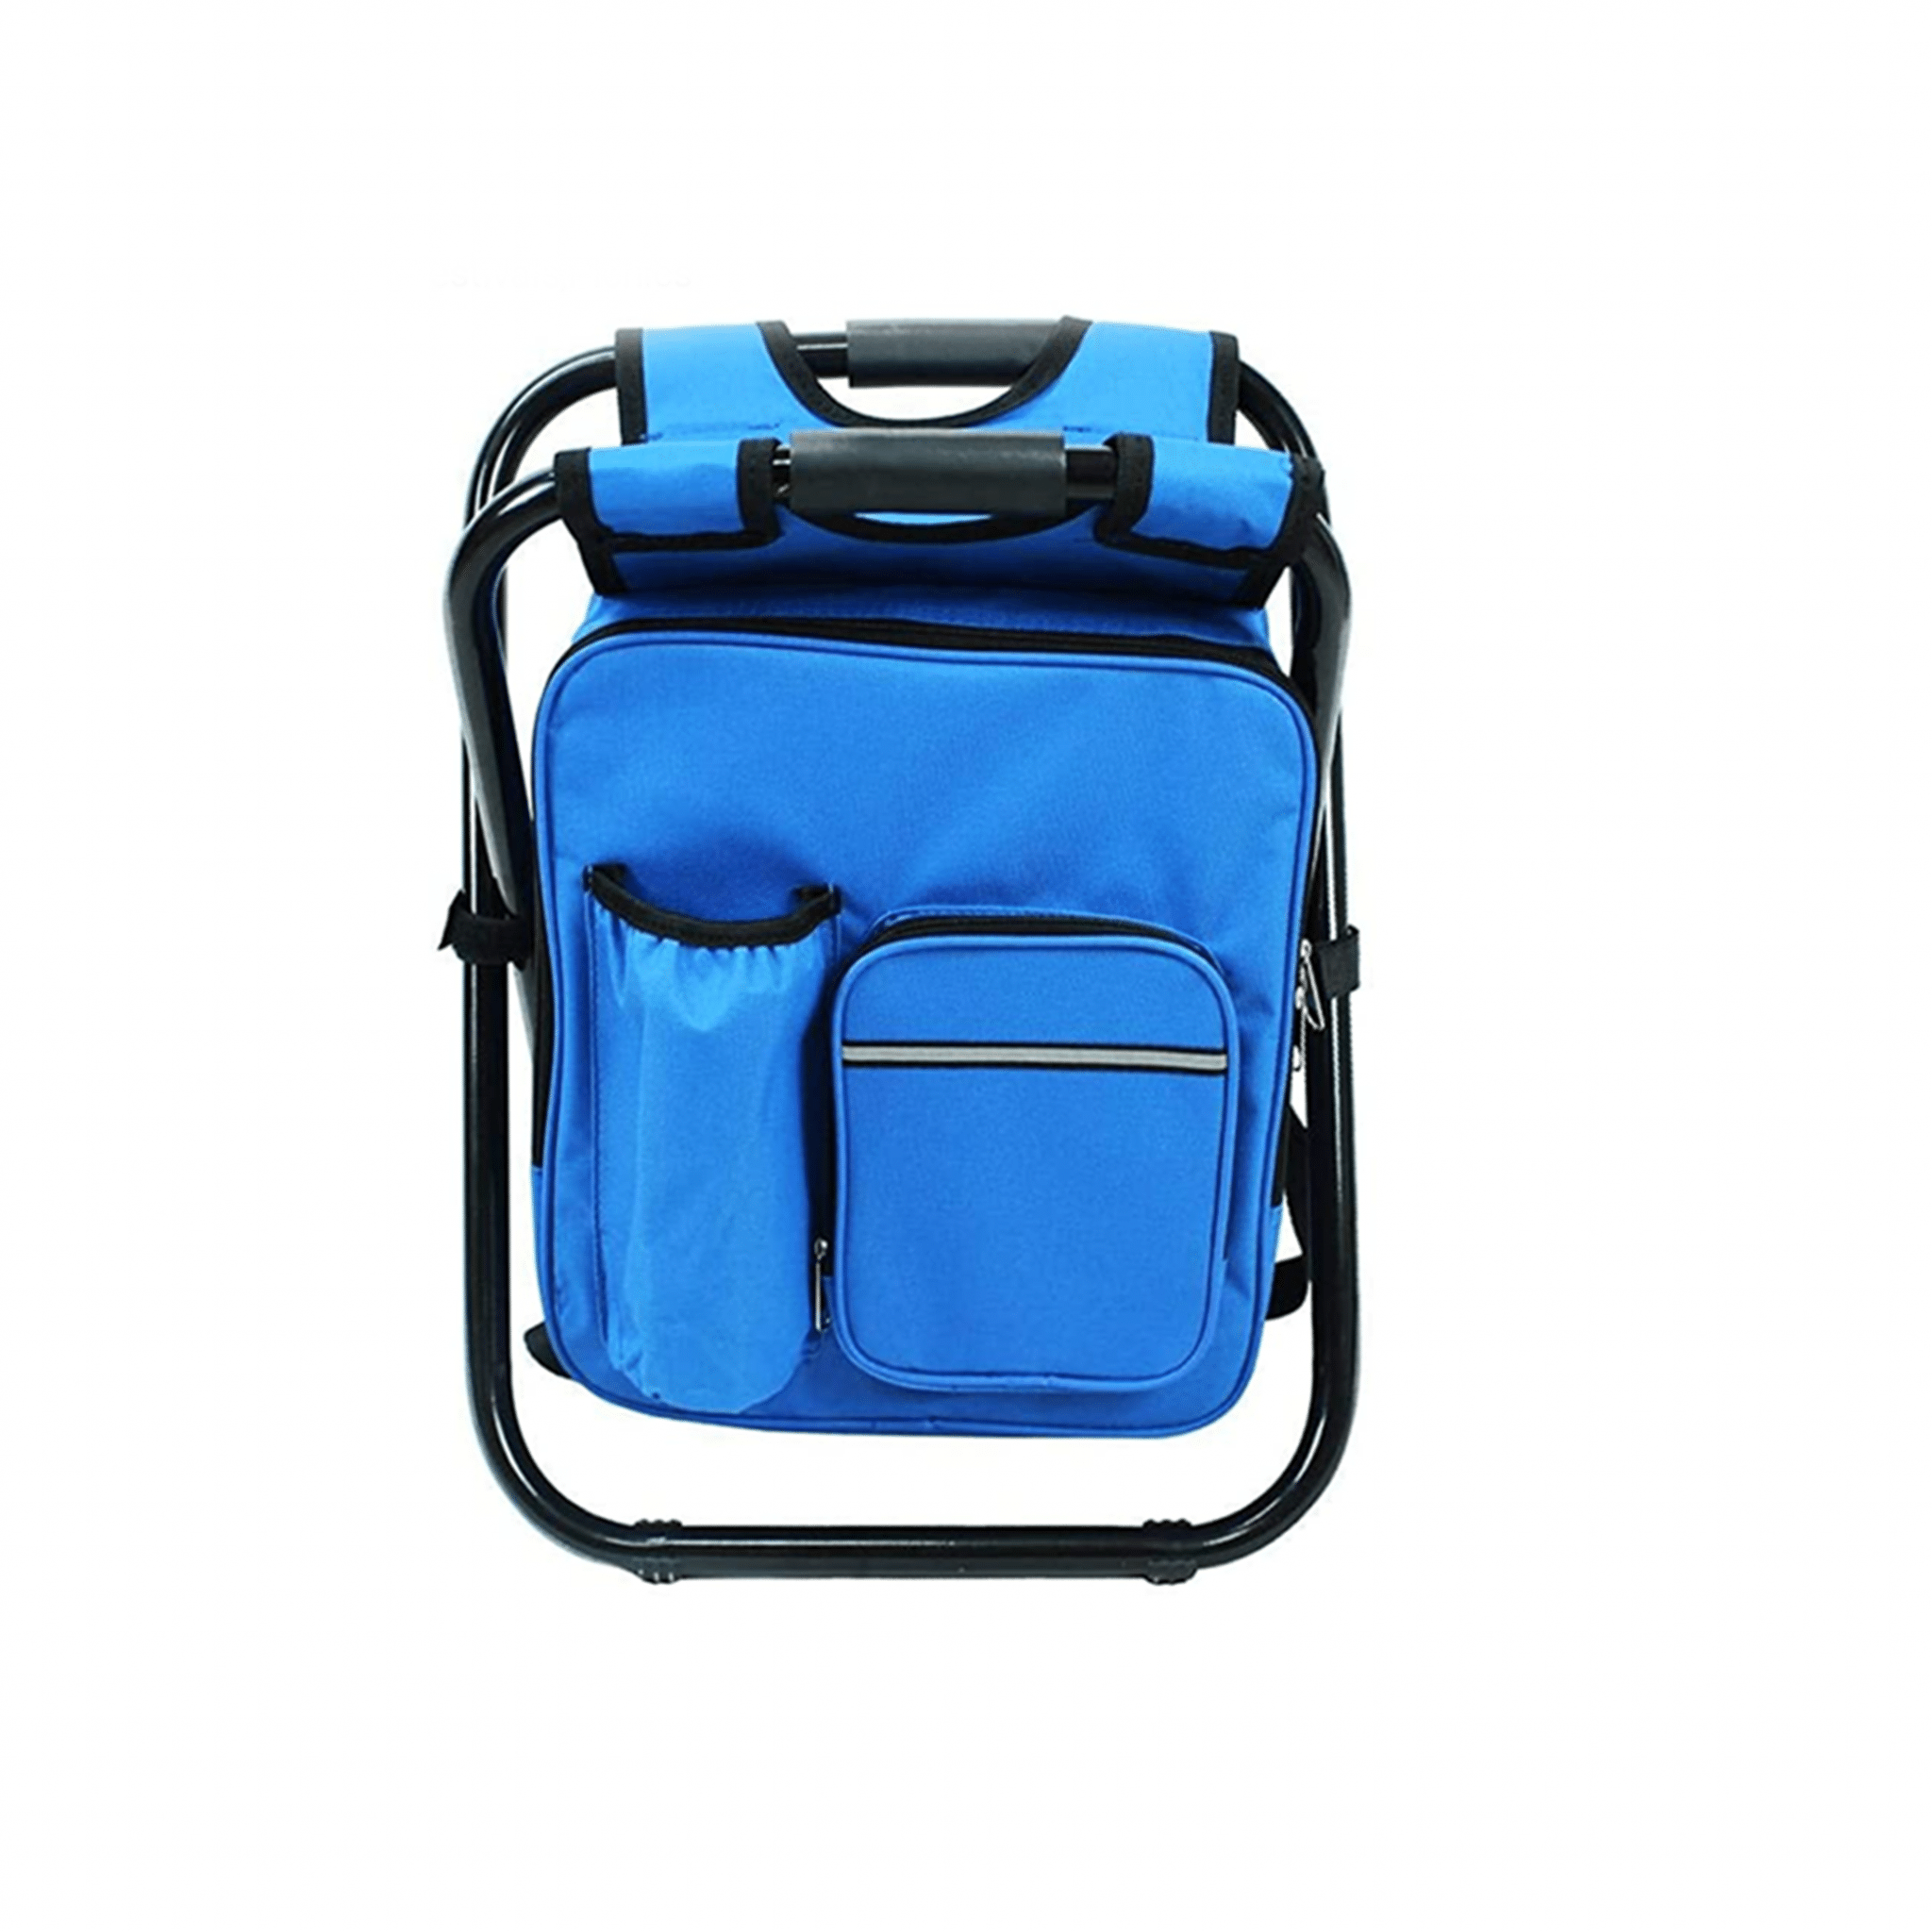 7. Strong 3NITY Backpack And Stool 2048x2048 